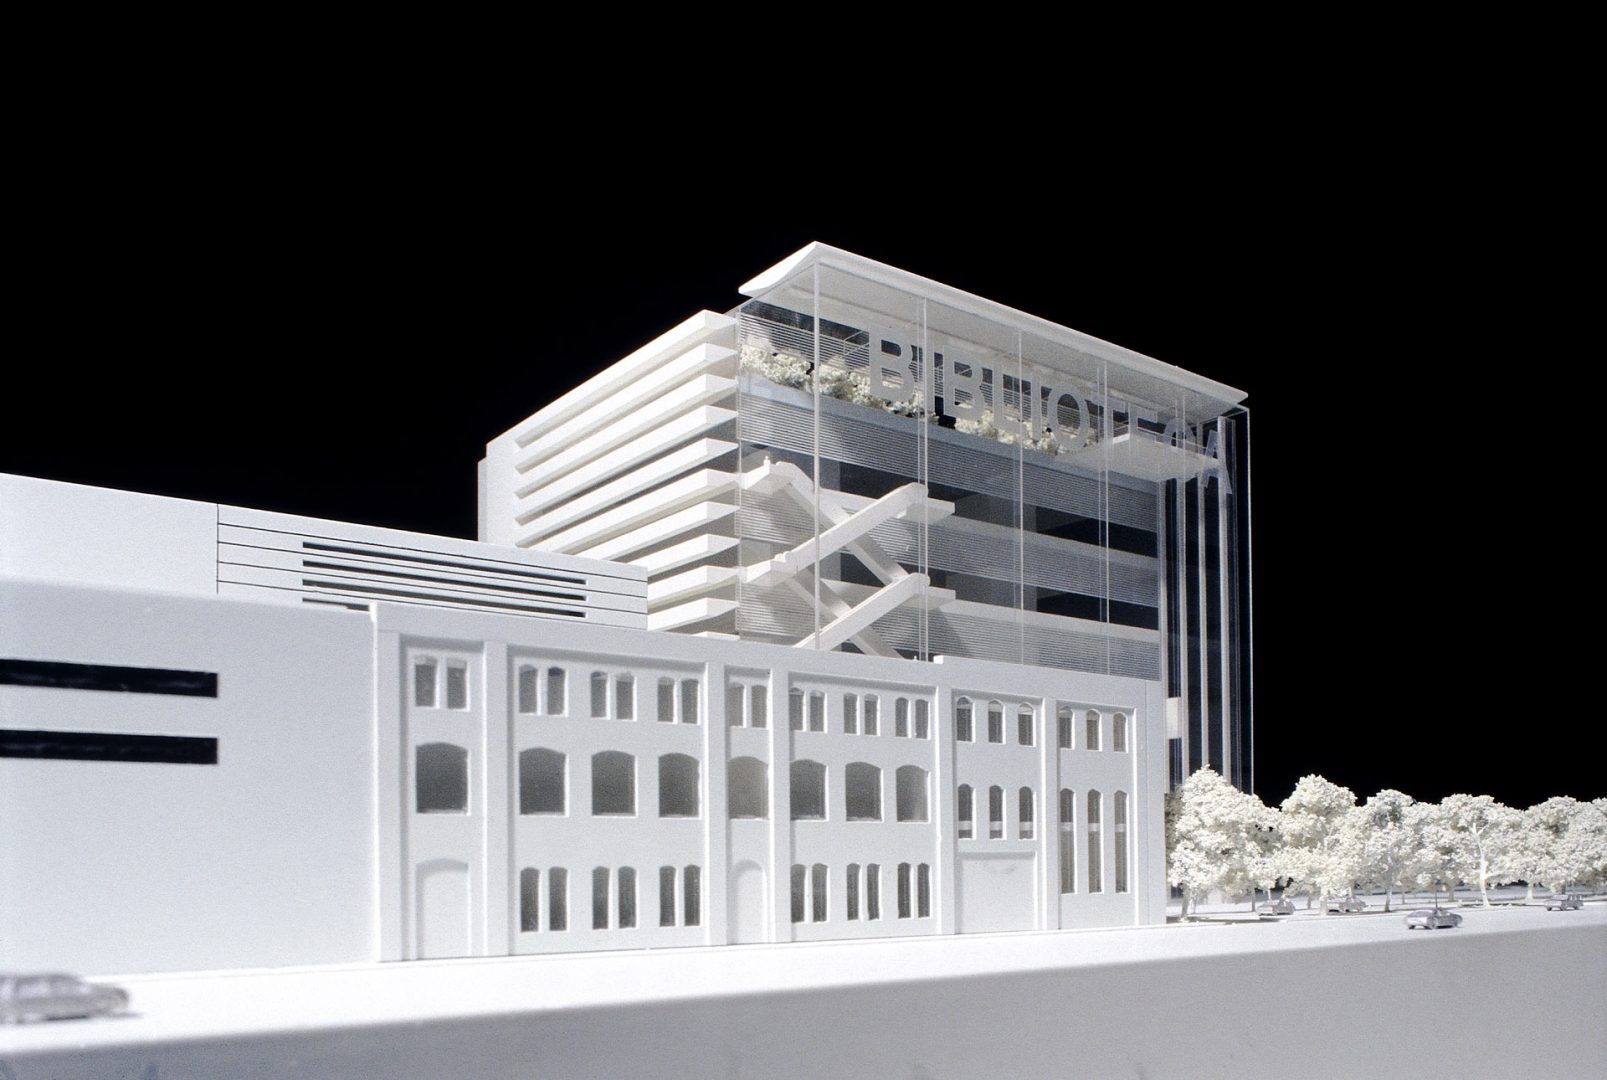 3D physical model of the proposed Centro Culturale di Torino from the Via Paulo Borsellino with the proposed city library beyond by Keith Williams Architects